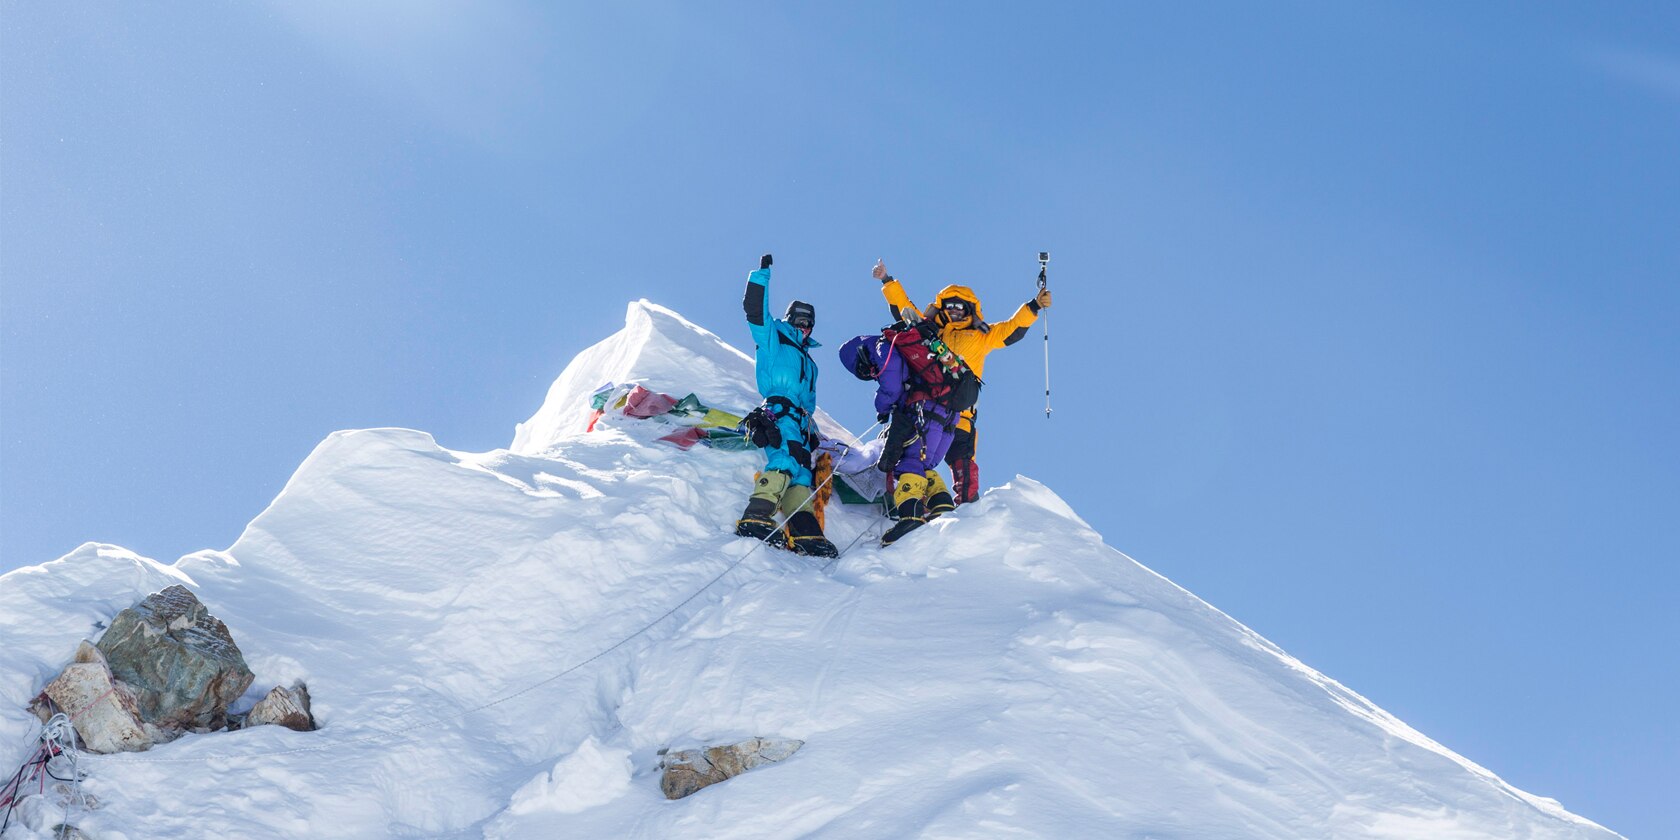 three people celibrate reaching the top of a snow covered peak